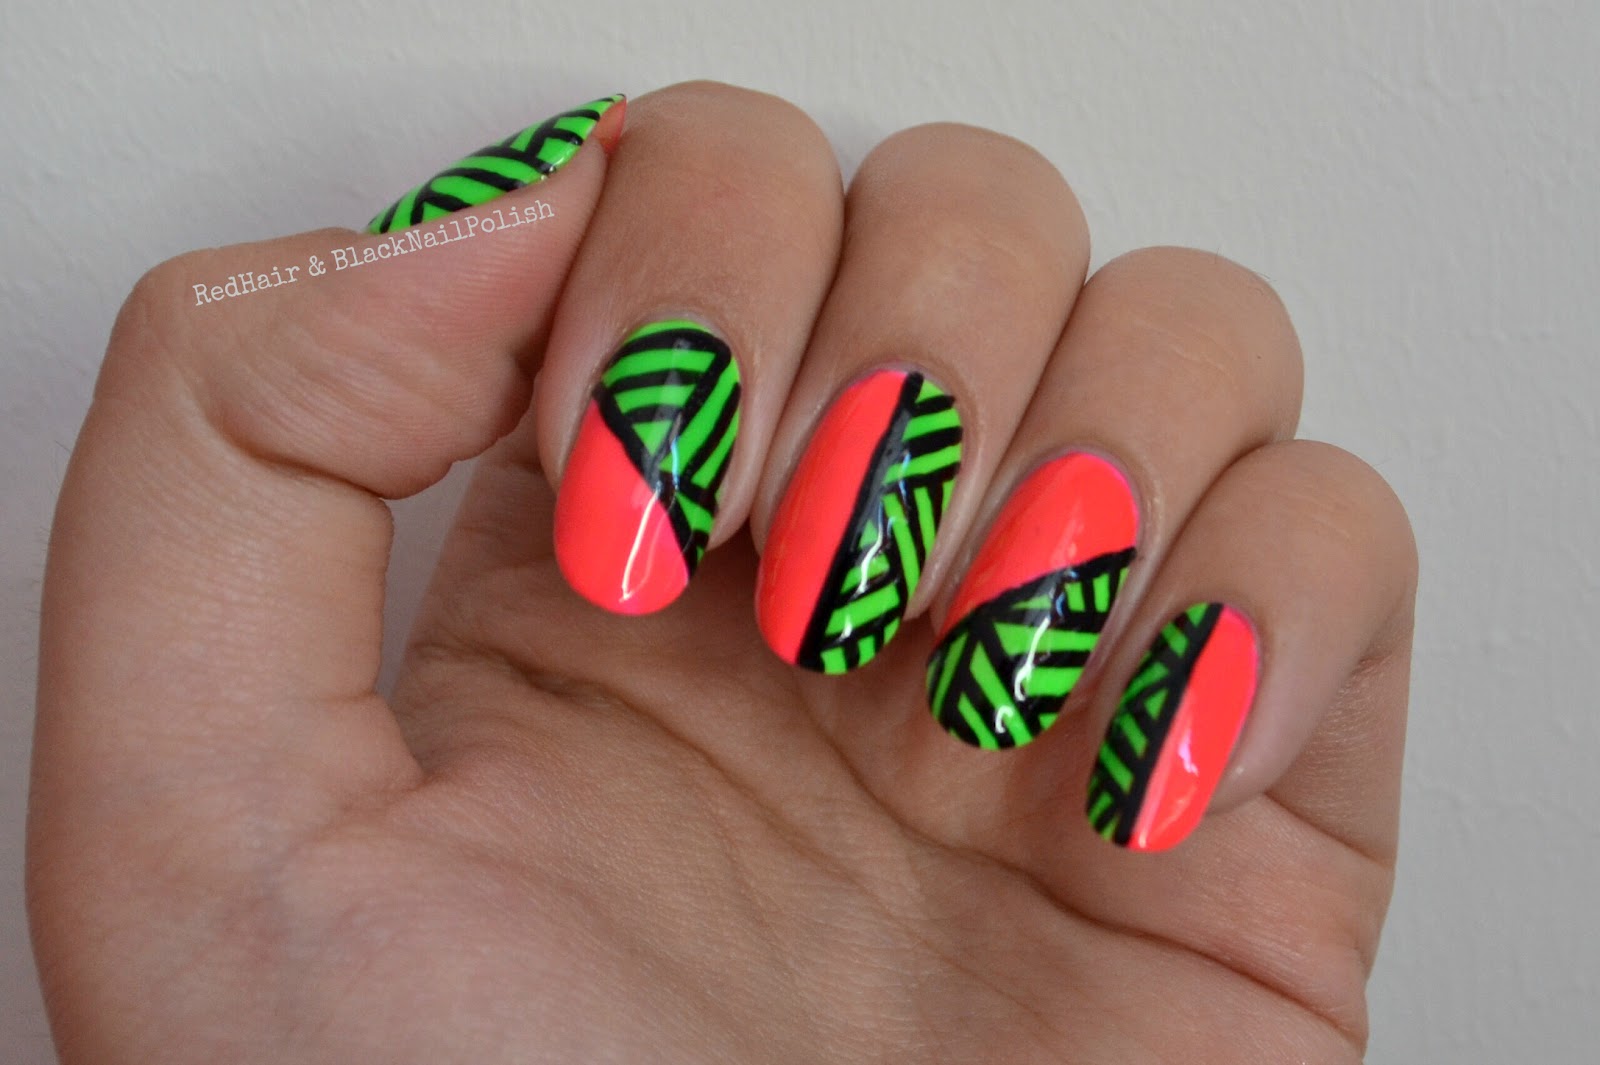 2. Best Neon Nail Designs for Summer - wide 3